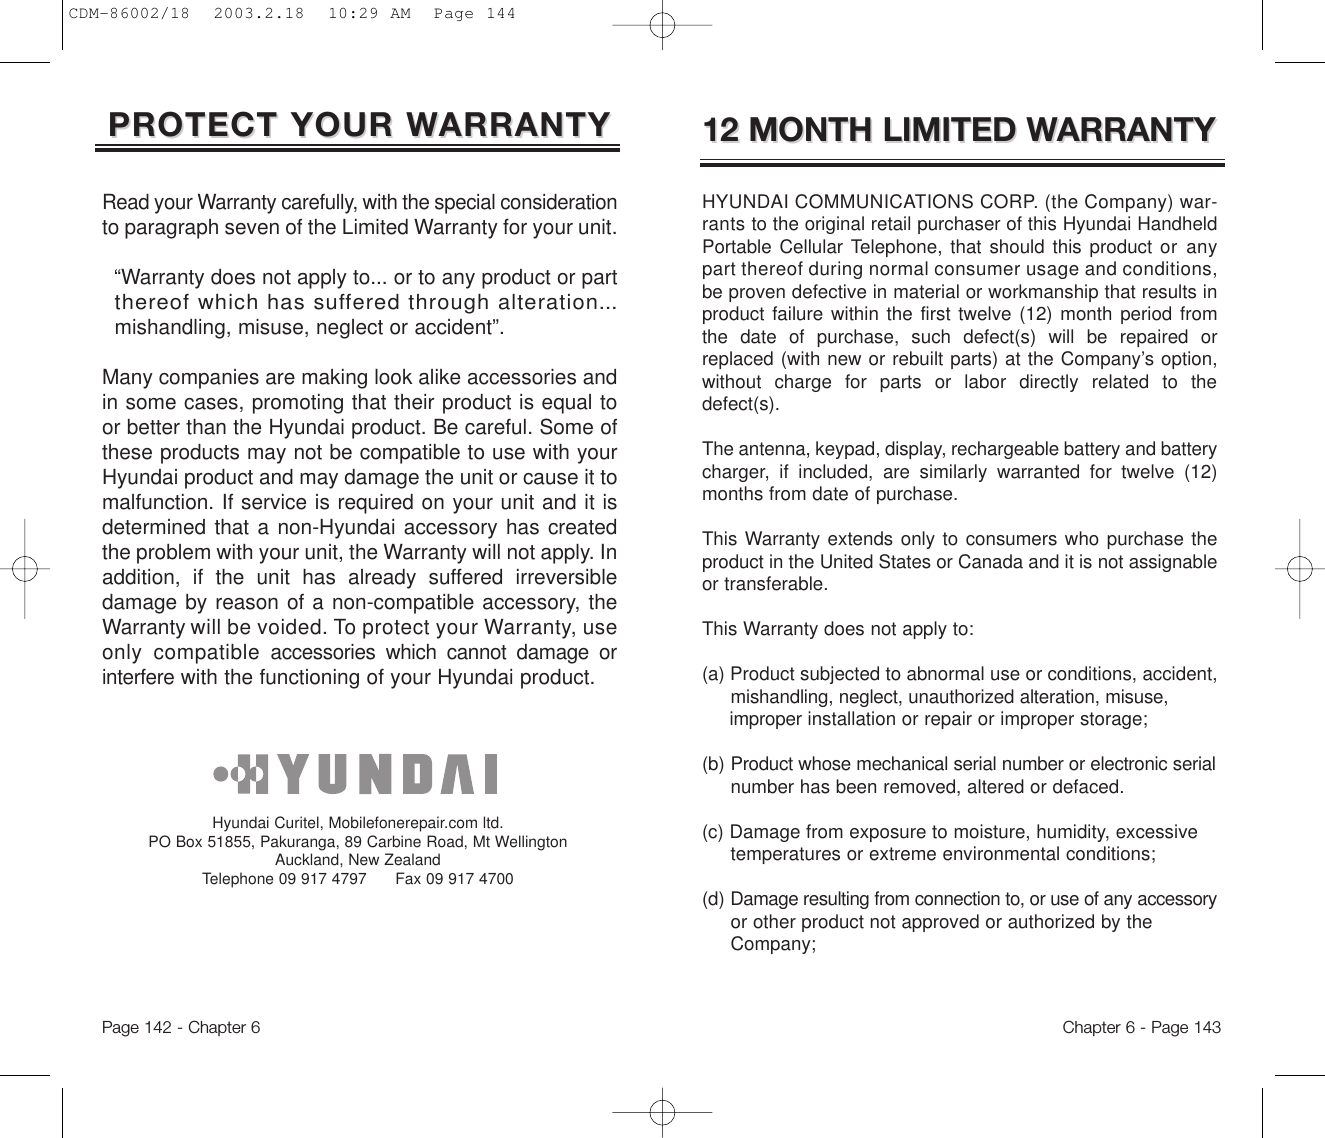 Chapter 6 - Page 143Page 142 - Chapter 612 MONTH LIMITED W12 MONTH LIMITED WARRANTYARRANTYHYUNDAI COMMUNICATIONS CORP. (the Company) war-rants to the original retail purchaser of this Hyundai HandheldPortable Cellular Telephone, that should this product or anypart thereof during normal consumer usage and conditions,be proven defective in material or workmanship that results inproduct failure within the first twelve (12) month period fromthe date of purchase, such defect(s) will be repaired orreplaced (with new or rebuilt parts) at the Company’s option,without charge for parts or labor directly related to thedefect(s).The antenna, keypad, display, rechargeable battery and batterycharger, if included, are similarly warranted for twelve (12)months from date of purchase.This Warranty extends only to consumers who purchase theproduct in the United States or Canada and it is not assignableor transferable.This Warranty does not apply to:(a) Product subjected to abnormal use or conditions, accident, mishandling, neglect, unauthorized alteration, misuse, improper installation or repair or improper storage;(b) Product whose mechanical serial number or electronic serialnumber has been removed, altered or defaced.(c) Damage from exposure to moisture, humidity, excessive temperatures or extreme environmental conditions;(d) Damage resulting from connection to, or use of any accessoryor other product not approved or authorized by the Company;PROTECT YOUR WPROTECT YOUR WARRANTYARRANTYRead your Warranty carefully, with the special considerationto paragraph seven of the Limited Warranty for your unit.“Warranty does not apply to... or to any product or part  thereof which has suffered through alteration...mishandling, misuse, neglect or accident”.Many companies are making look alike accessories andin some cases, promoting that their product is equal toor better than the Hyundai product. Be careful. Some ofthese products may not be compatible to use with yourHyundai product and may damage the unit or cause it tomalfunction. If service is required on your unit and it isdetermined that a non-Hyundai accessory has createdthe problem with your unit, the Warranty will not apply. Inaddition, if the unit has already suffered irreversibledamage by reason of a non-compatible accessory, theWarranty will be voided. To protect your Warranty, useonly compatibleaccessories which cannot damage orinterferewith the functioning of your Hyundai product.   Hyundai Curitel, Mobilefonerepair.com ltd. PO Box 51855, Pakuranga, 89 Carbine Road, Mt WellingtonAuckland, New Zealand Telephone 09 917 4797      Fax 09 917 4700CDM-86002/18  2003.2.18  10:29 AM  Page 144